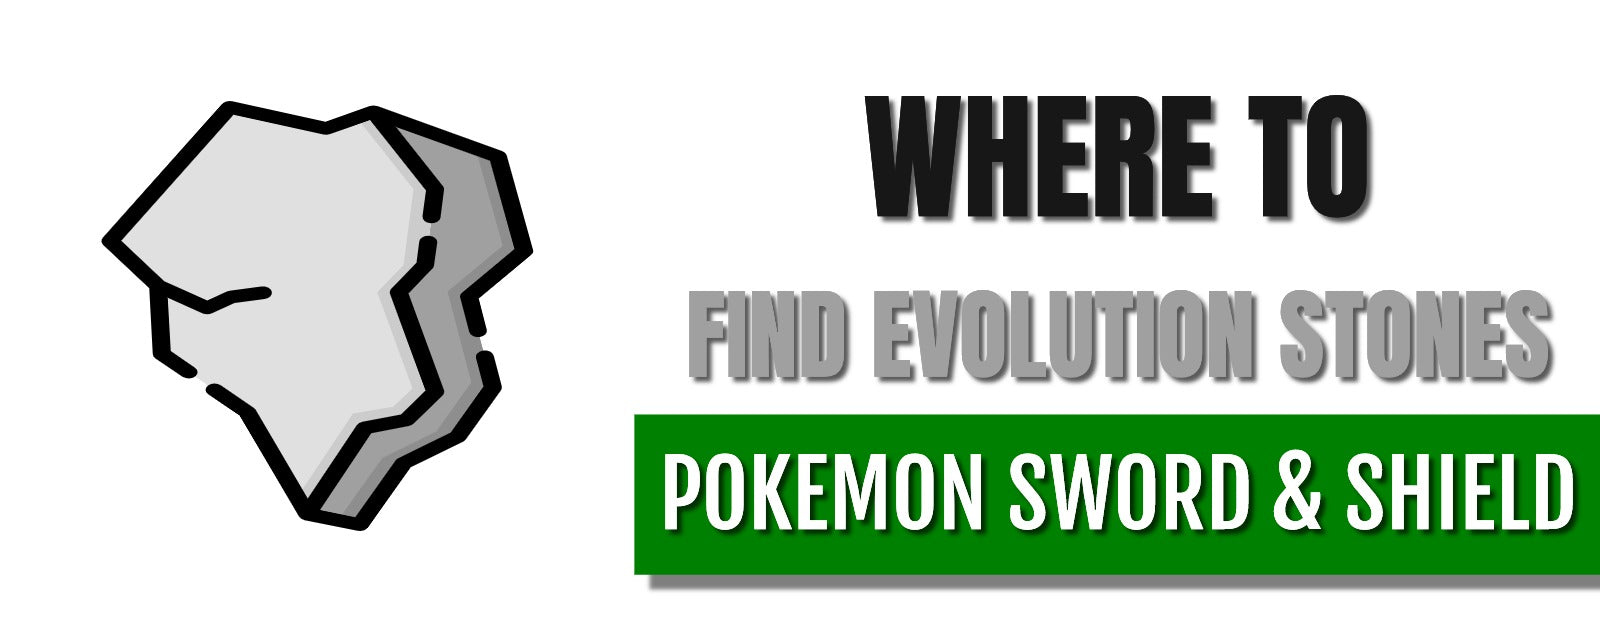 Where to find evolution stones in Pokemon Sword and Shield